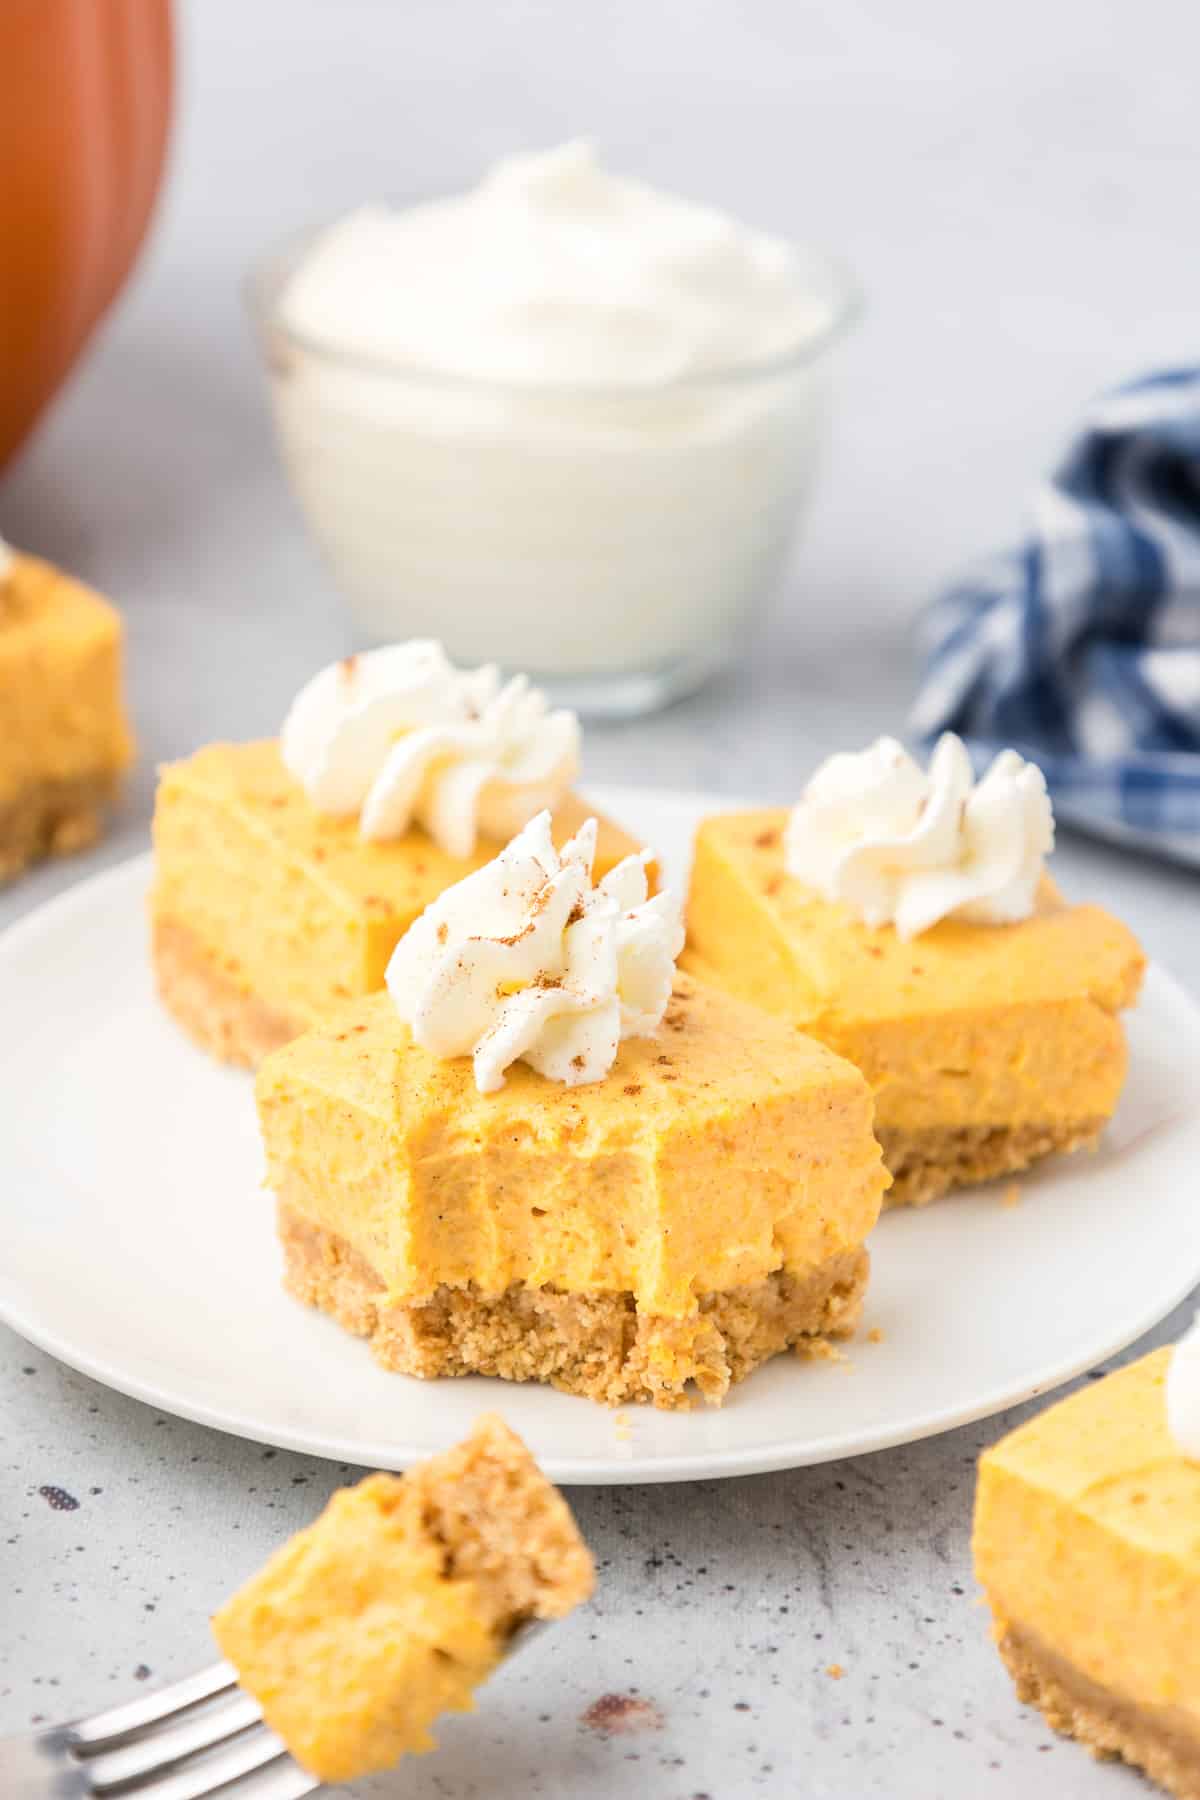 Three no bake pumpkin cheesecake bars on a plate from the side topped with whipped cream with the front bar missing a bite.